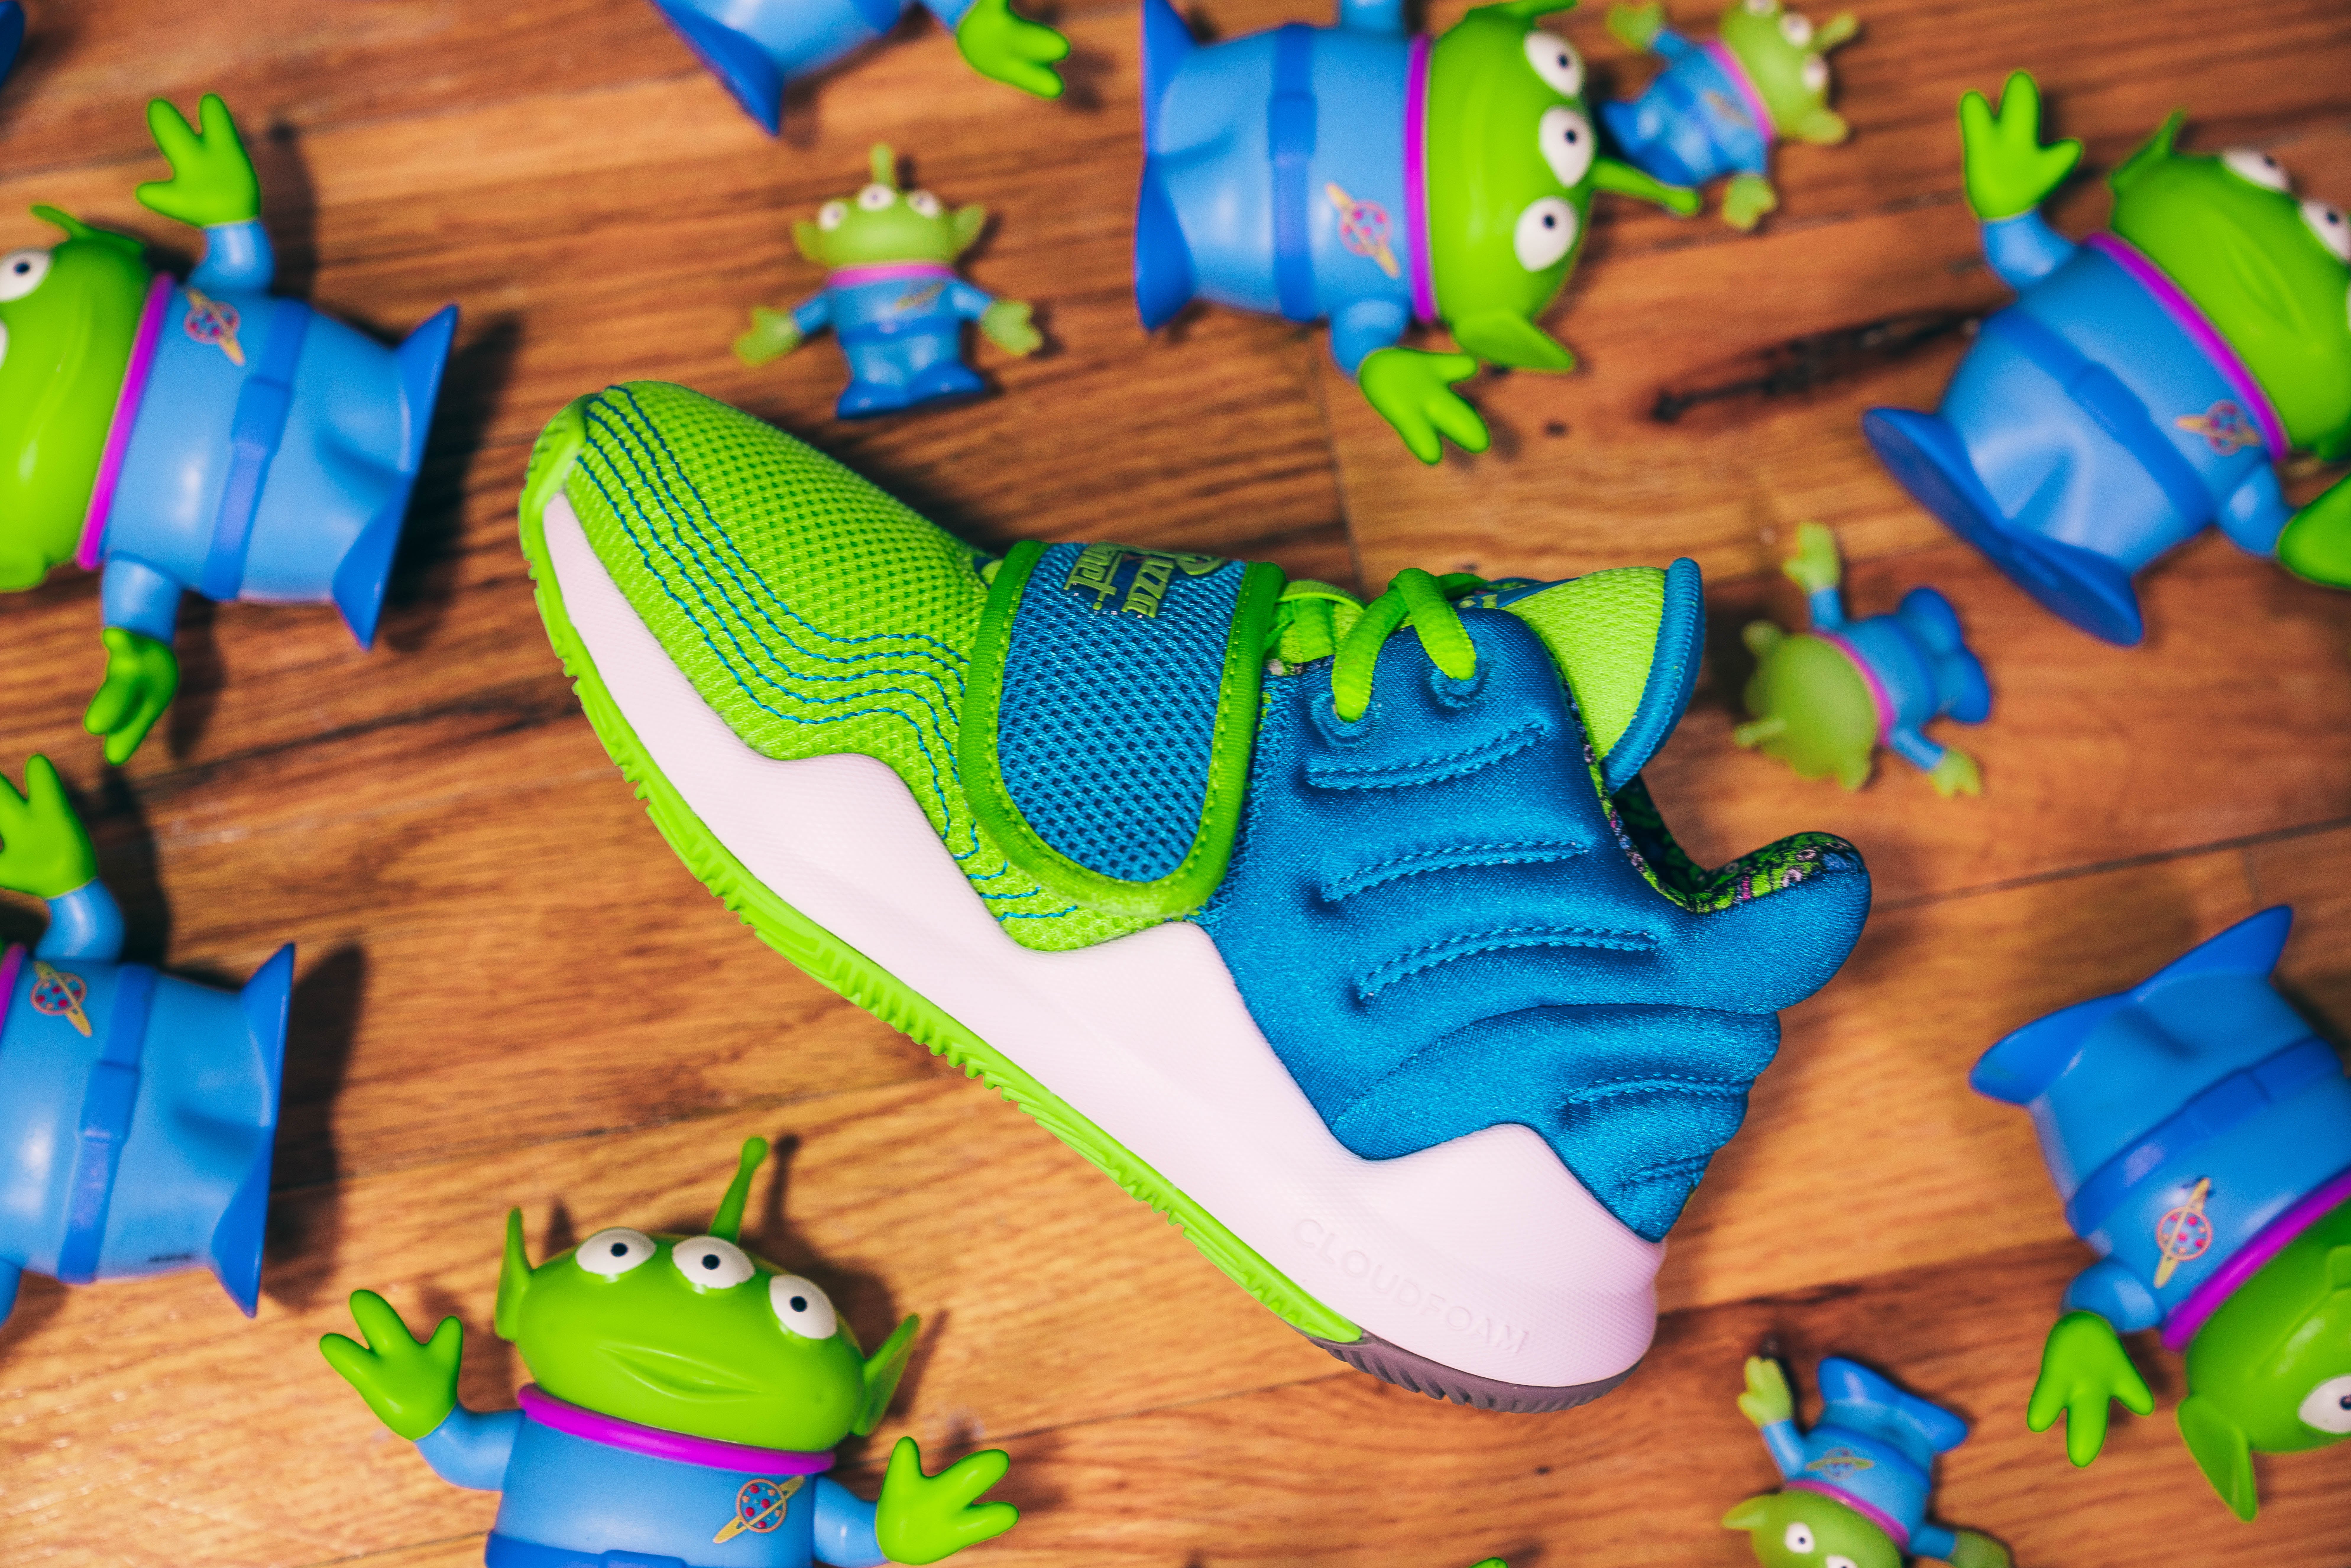 Adidas x Toy Story Friendship Collection Kids' Shoes | POPSUGAR Family